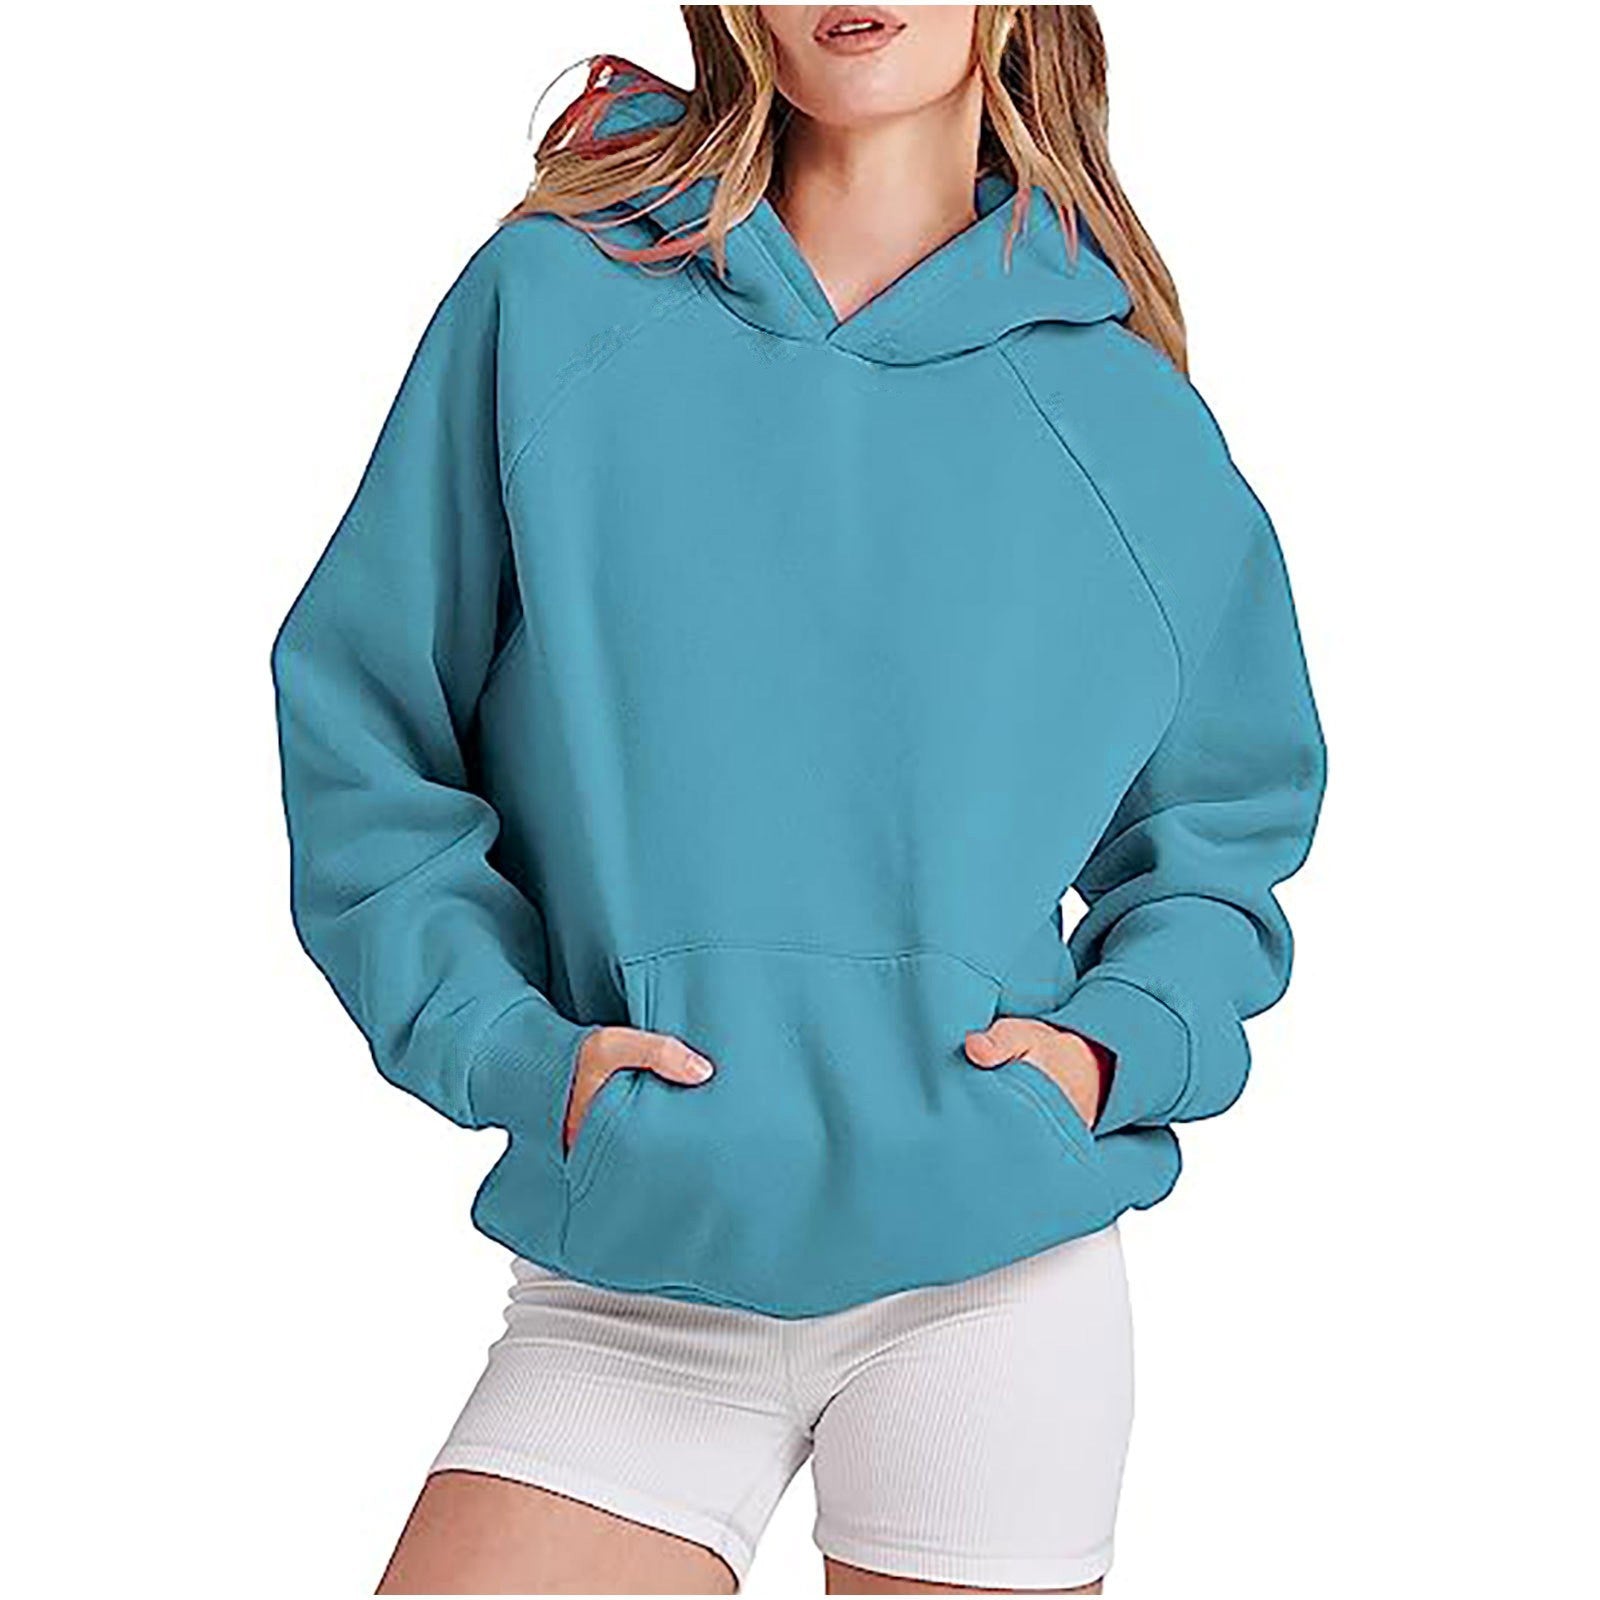 Women's Loose Casual Shoulder Sleeve Hooded Solid Sweaters